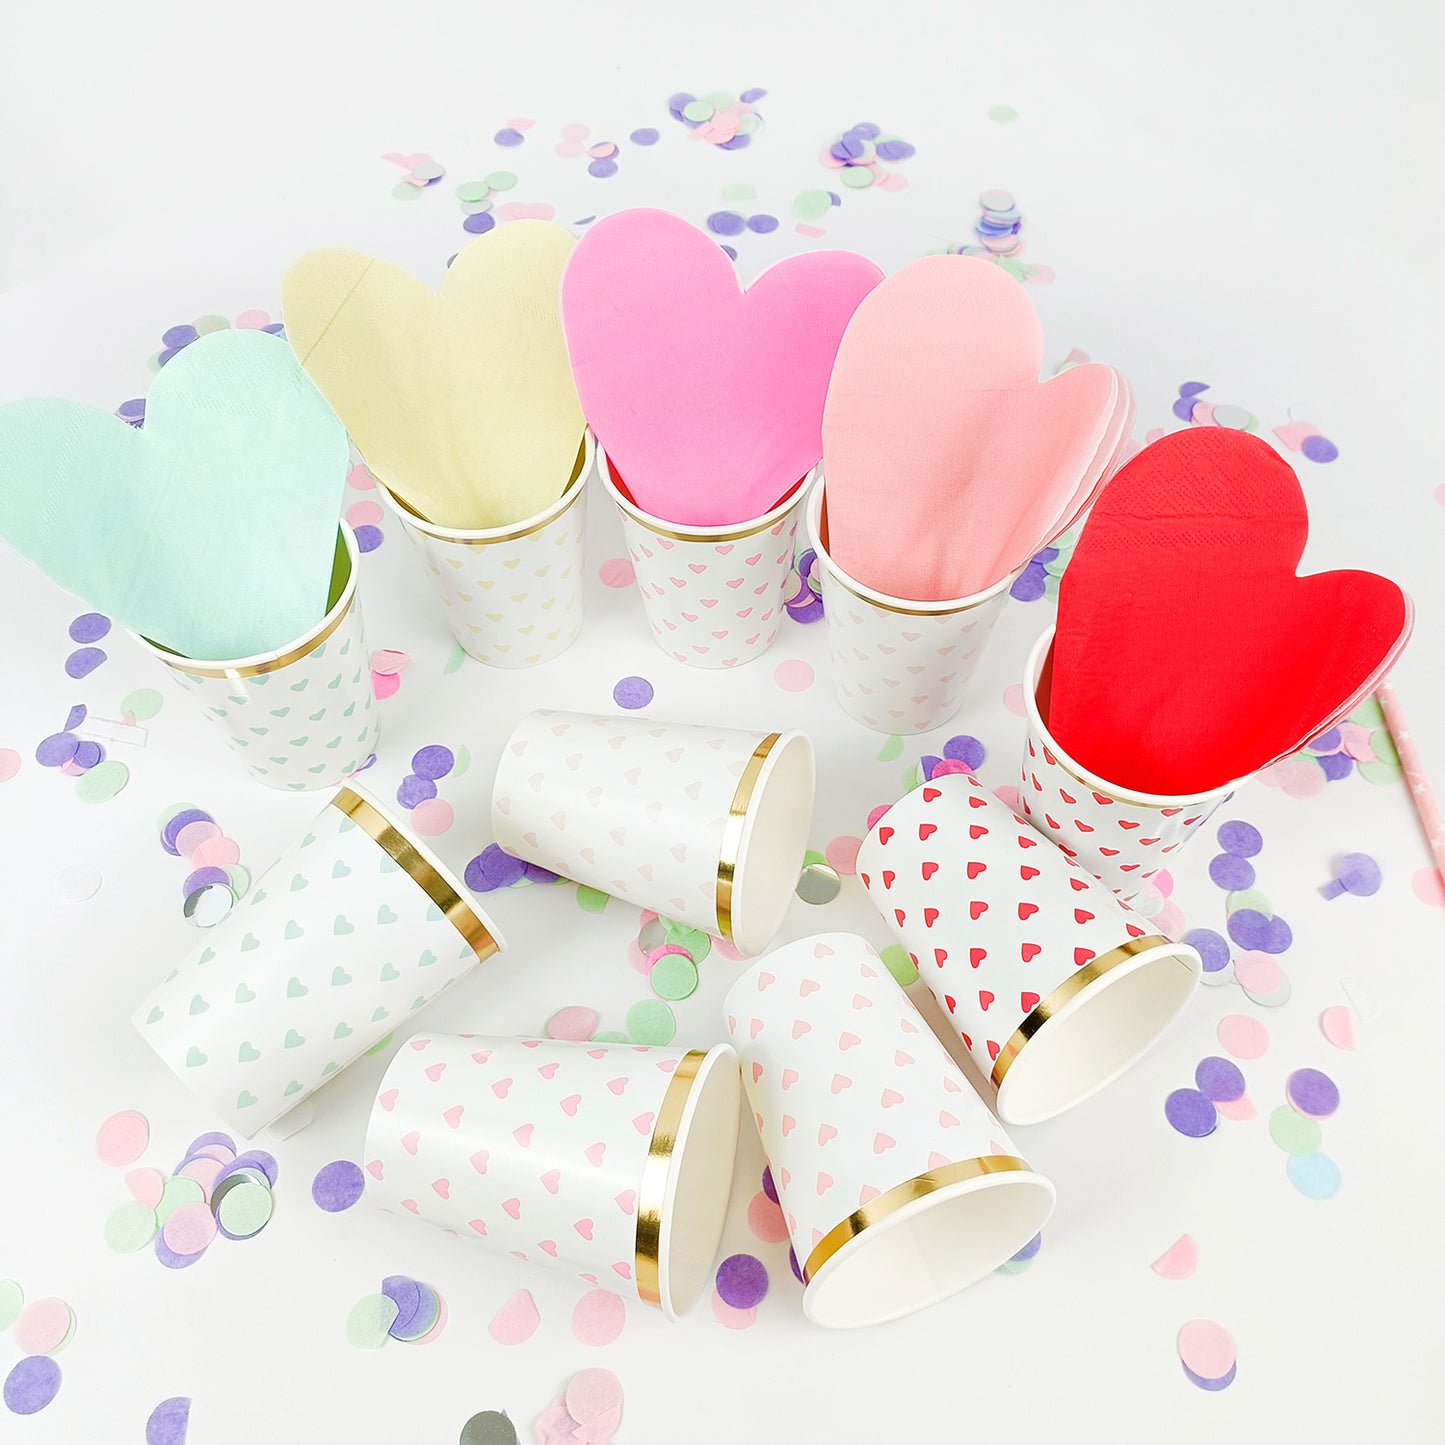 Colorful Blushing Heart Paper Plate for Party Decorations Cute Hexagonal Disposable Paper Plates Party Supplies